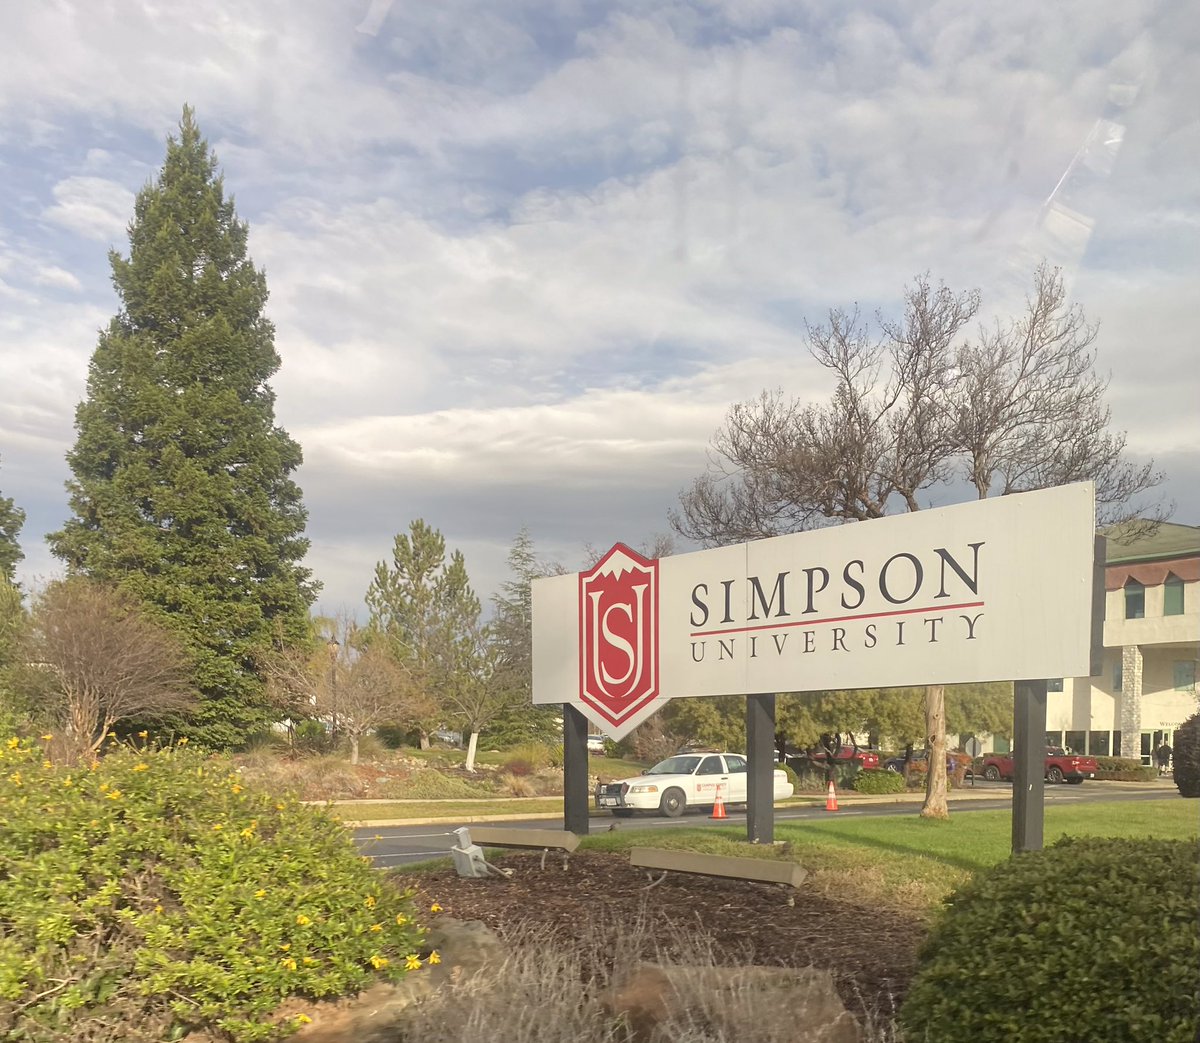 After a great visit to @SimpsonRedHawks facility and an honoring conversation with Head Coach @CoachSDD , I’m blessed to say i’ve received my 1st athletic scholarship to continue my football career at Simpson University! @coachj_bo21 @RTS_9 @WCPSacramento @RioAmericanoFB